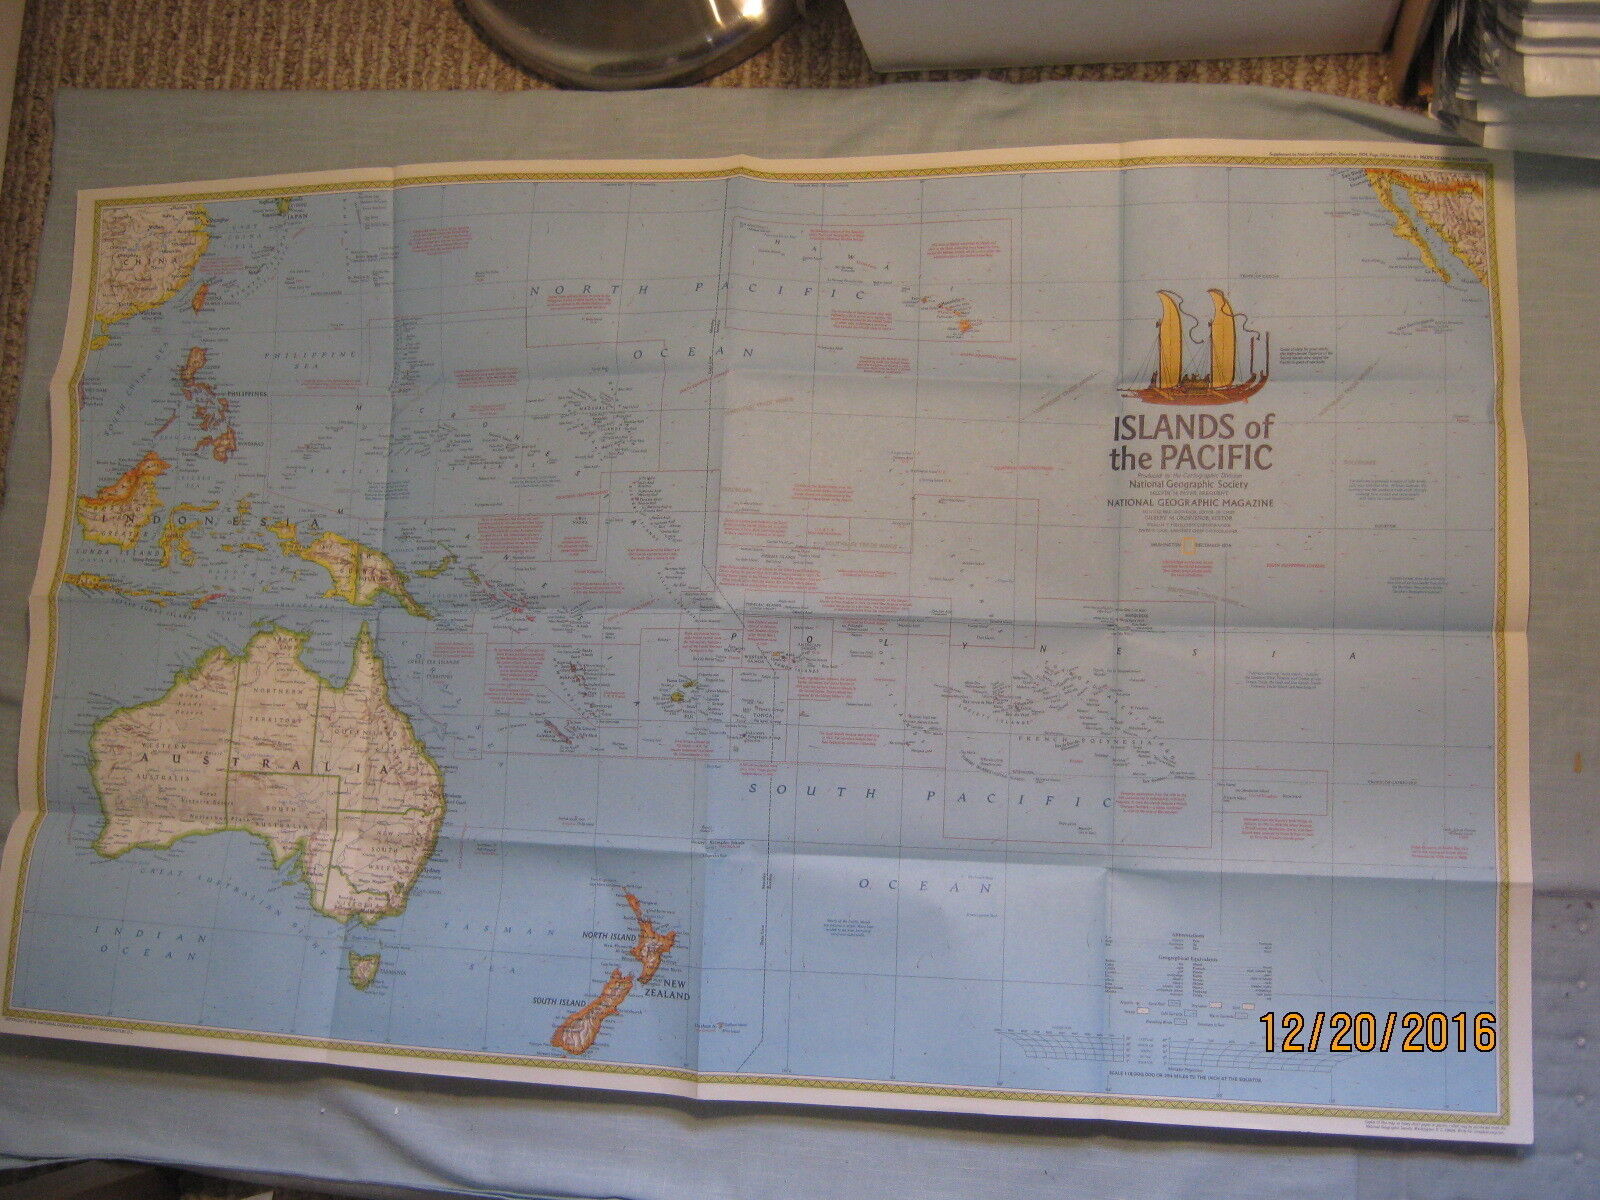 DISCOVERERS OF THE ISLANDS OF THE PACIFIC MAP National Geographic December 1974